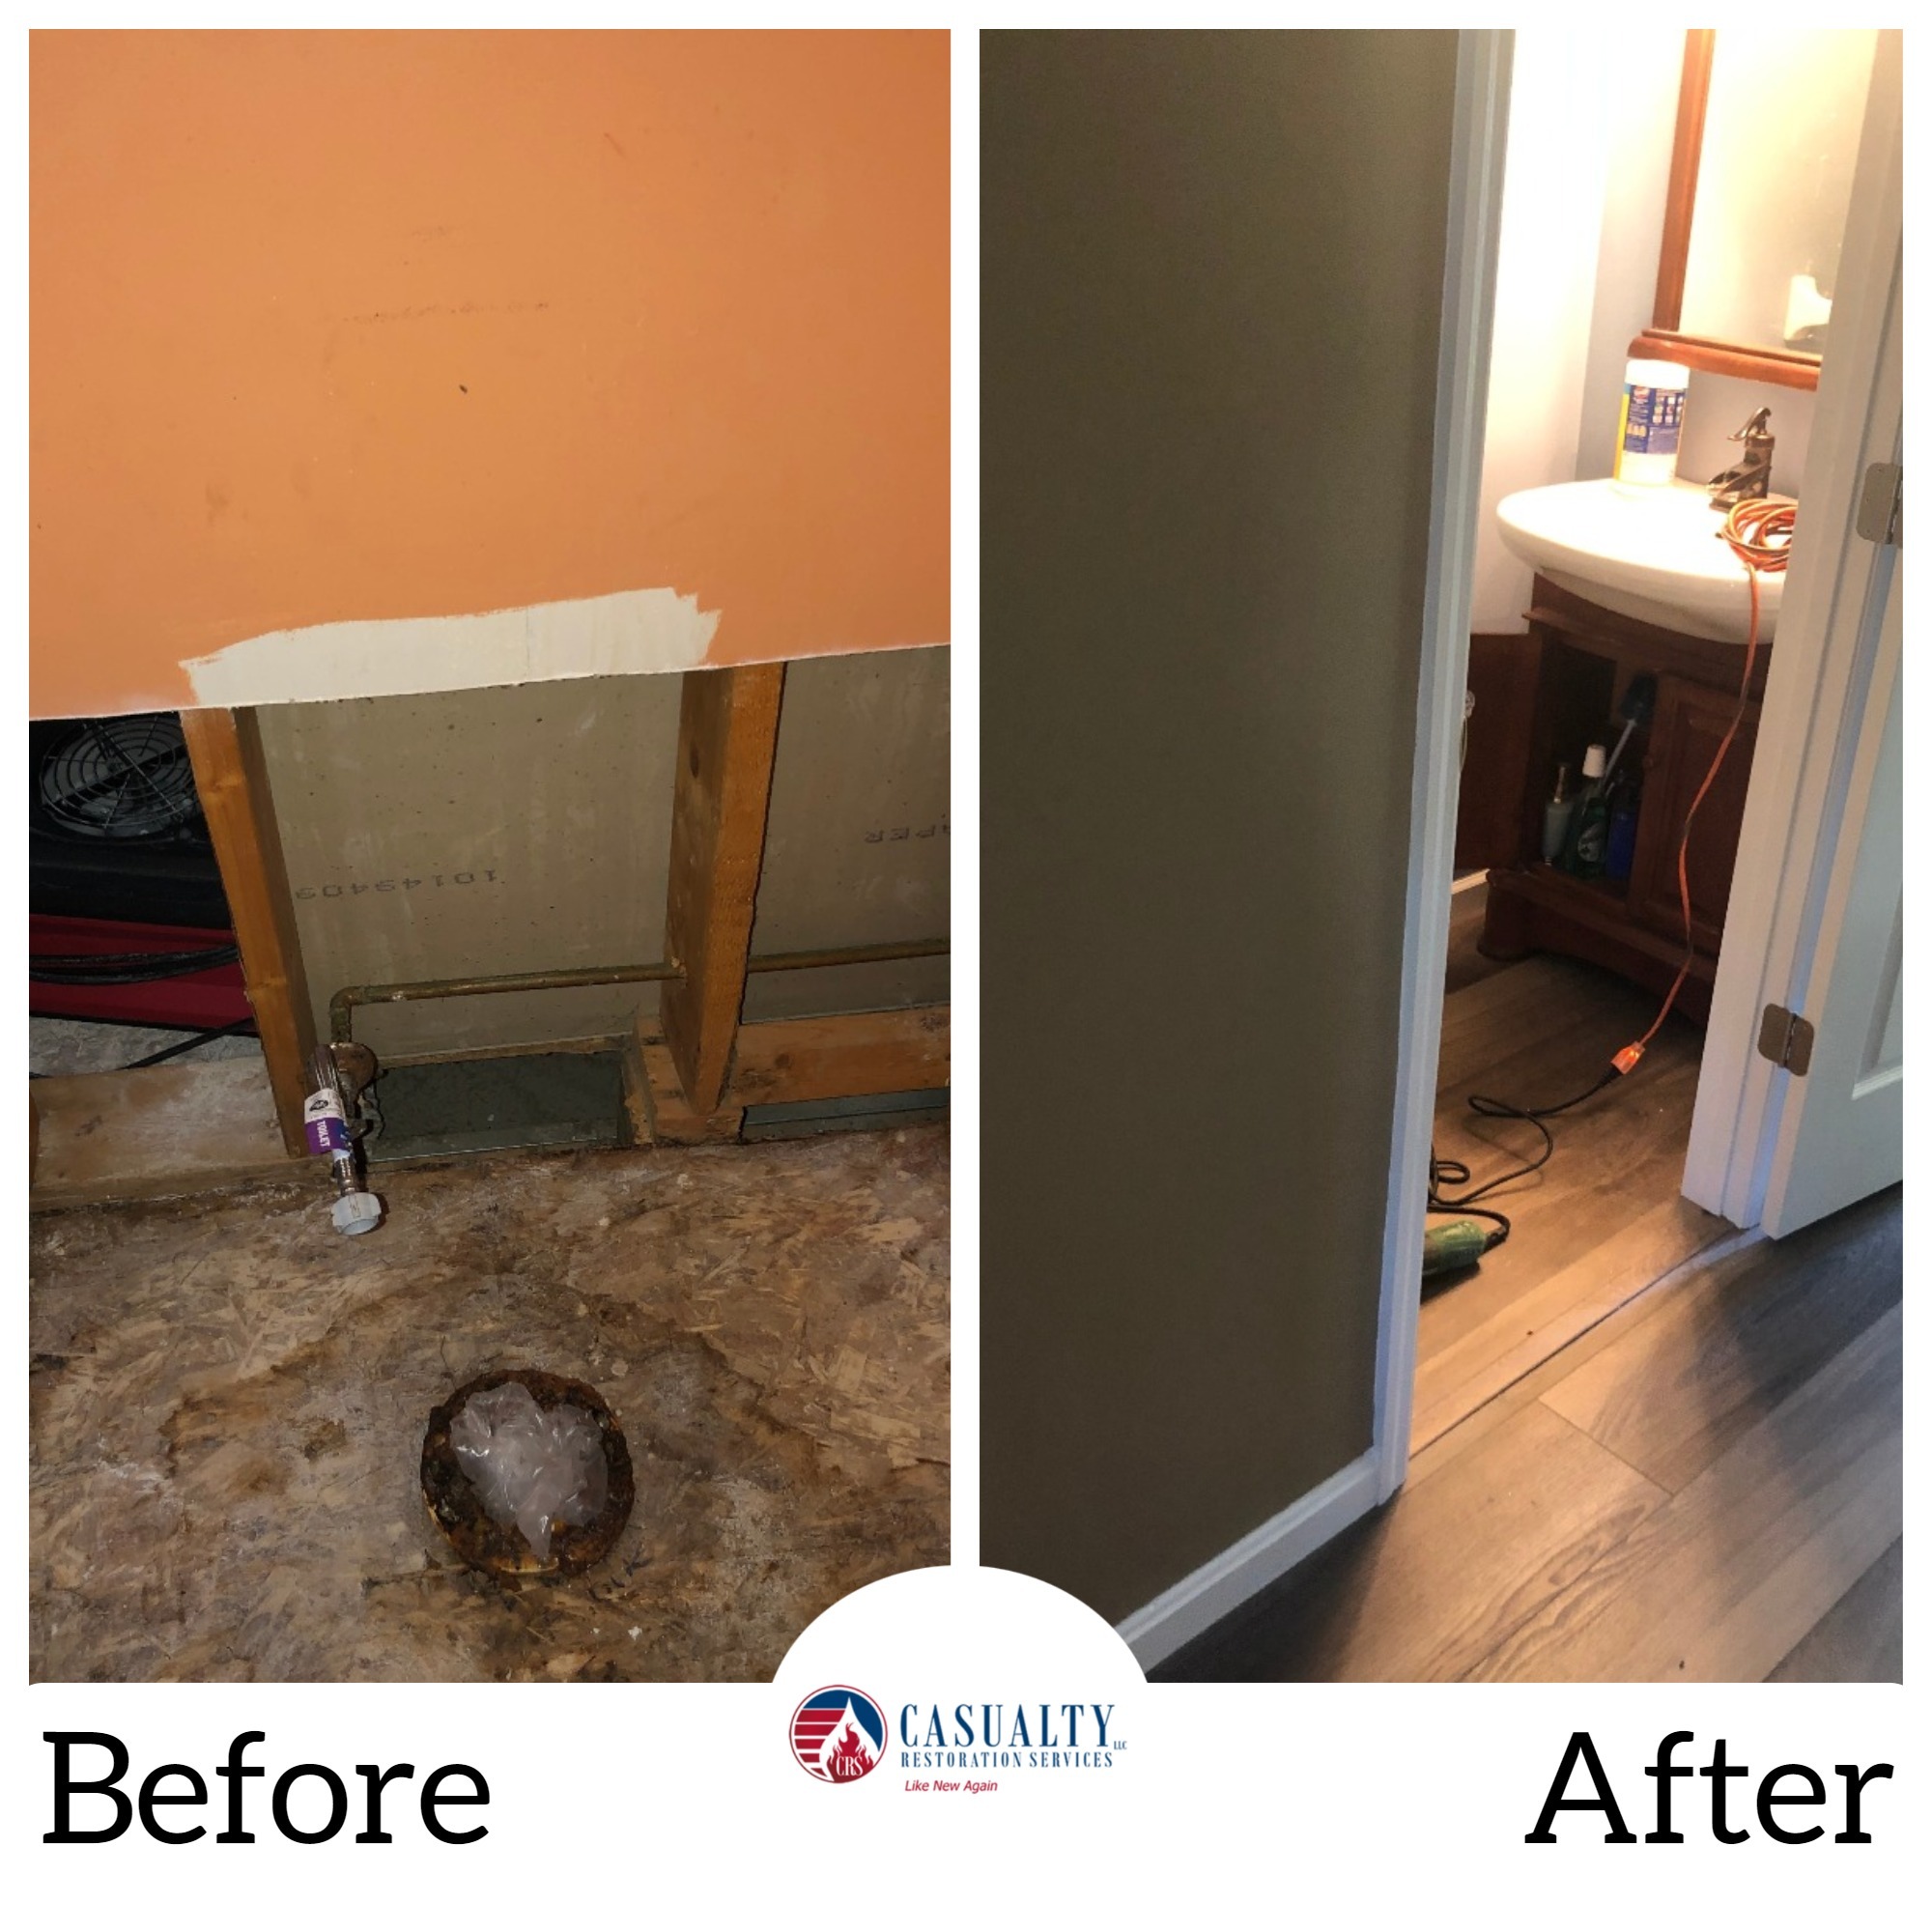 When it comes to your damage restoration needs, we are the ones to contact!